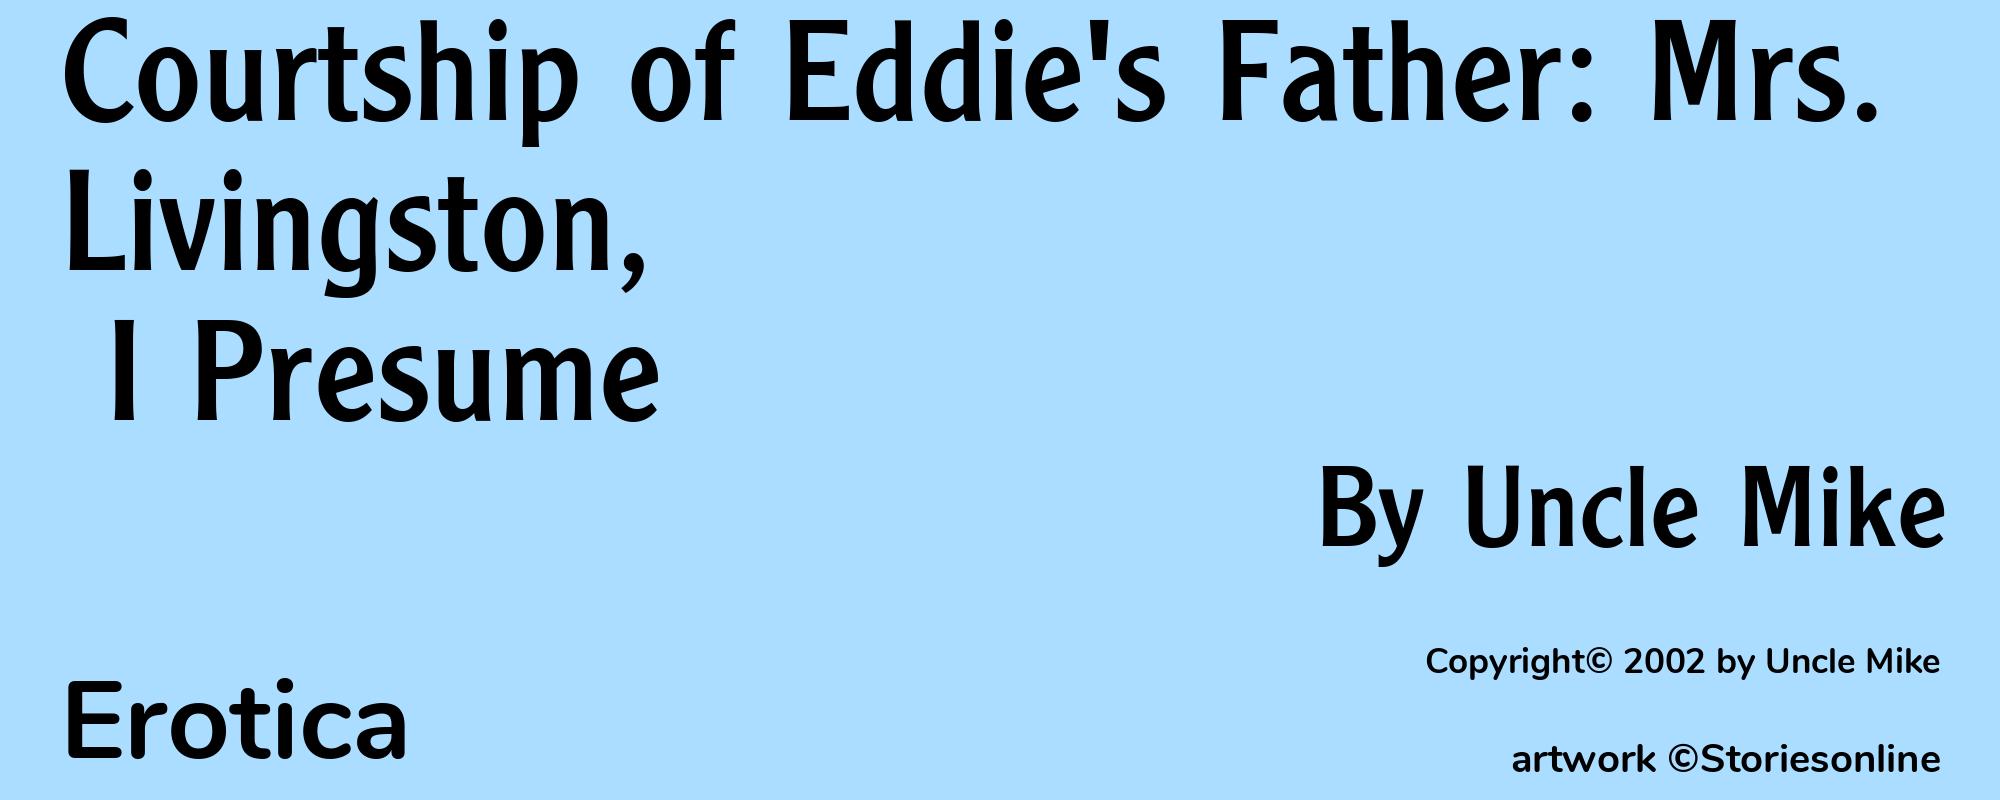 Courtship of Eddie's Father: Mrs. Livingston, I Presume - Cover